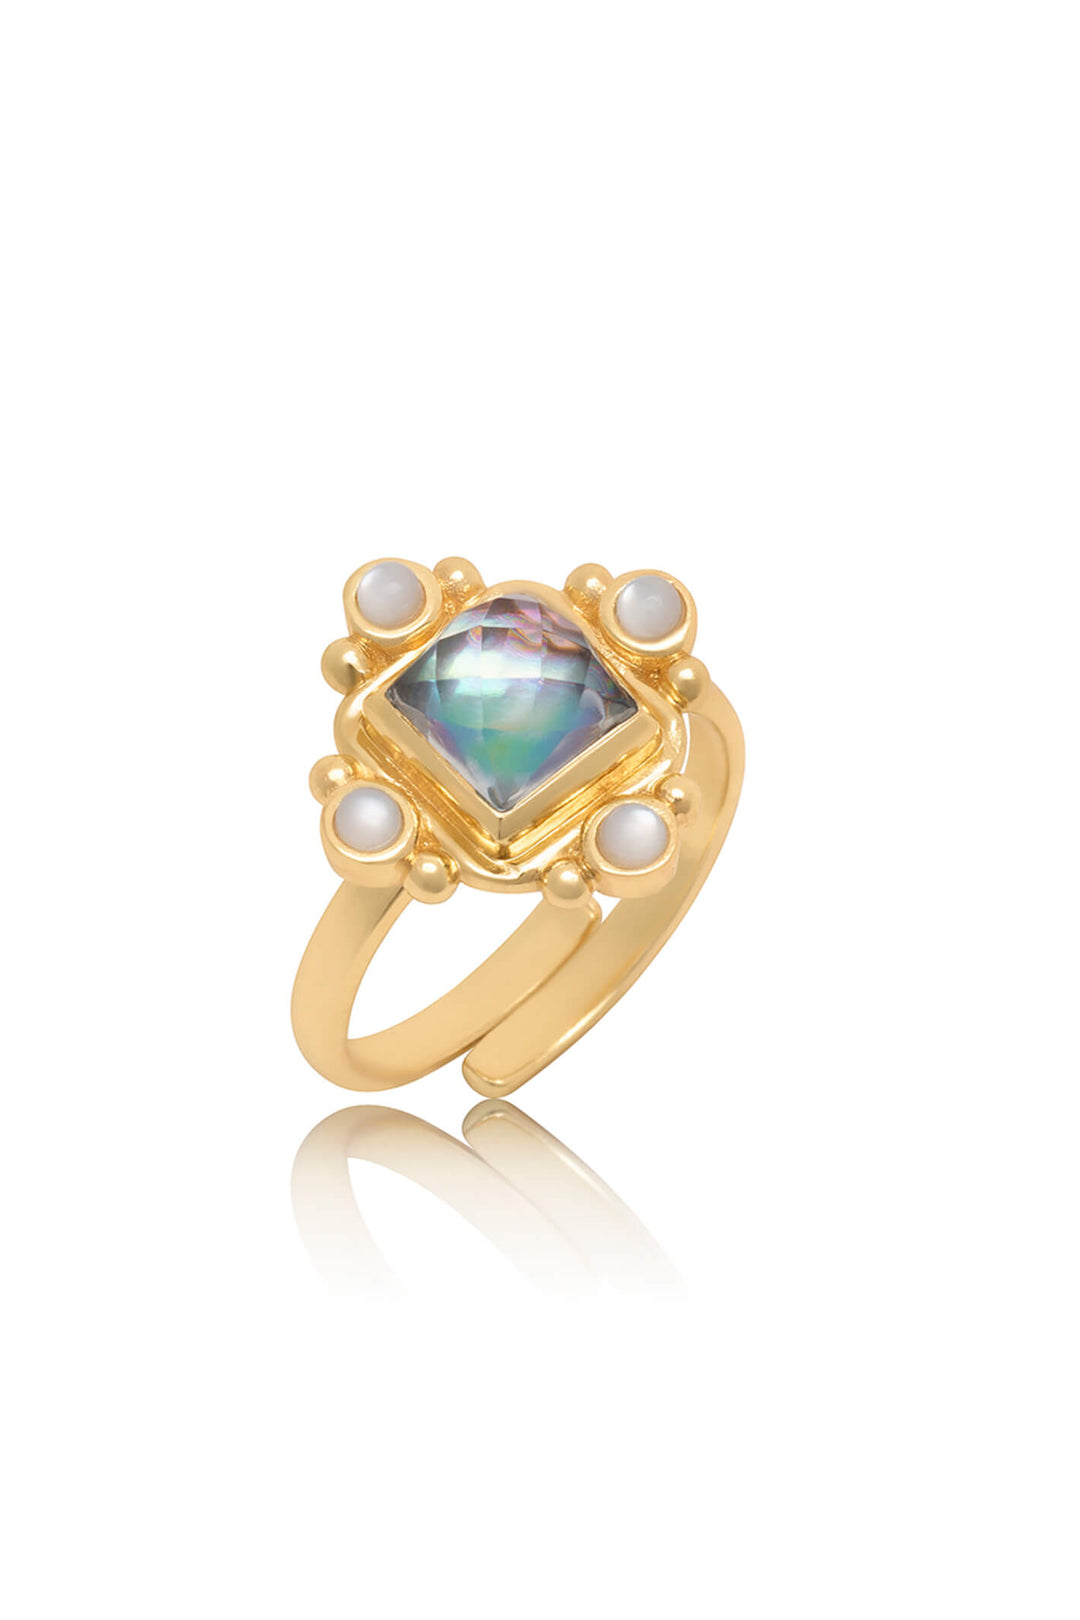 Azuni Helena Five Stone Abalone Cocktail Ring - Experience Boutique